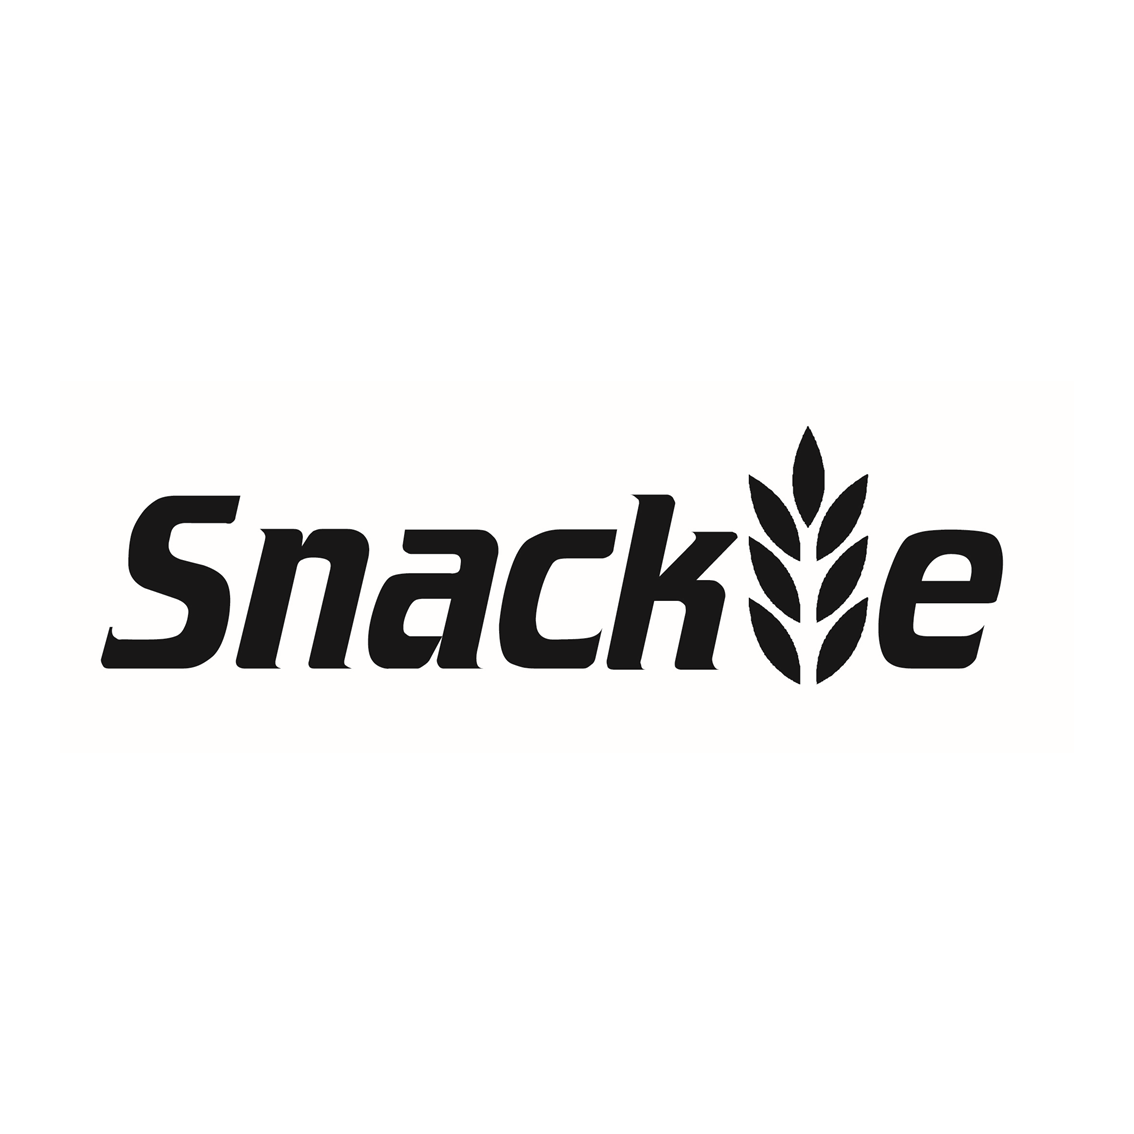 Snackie